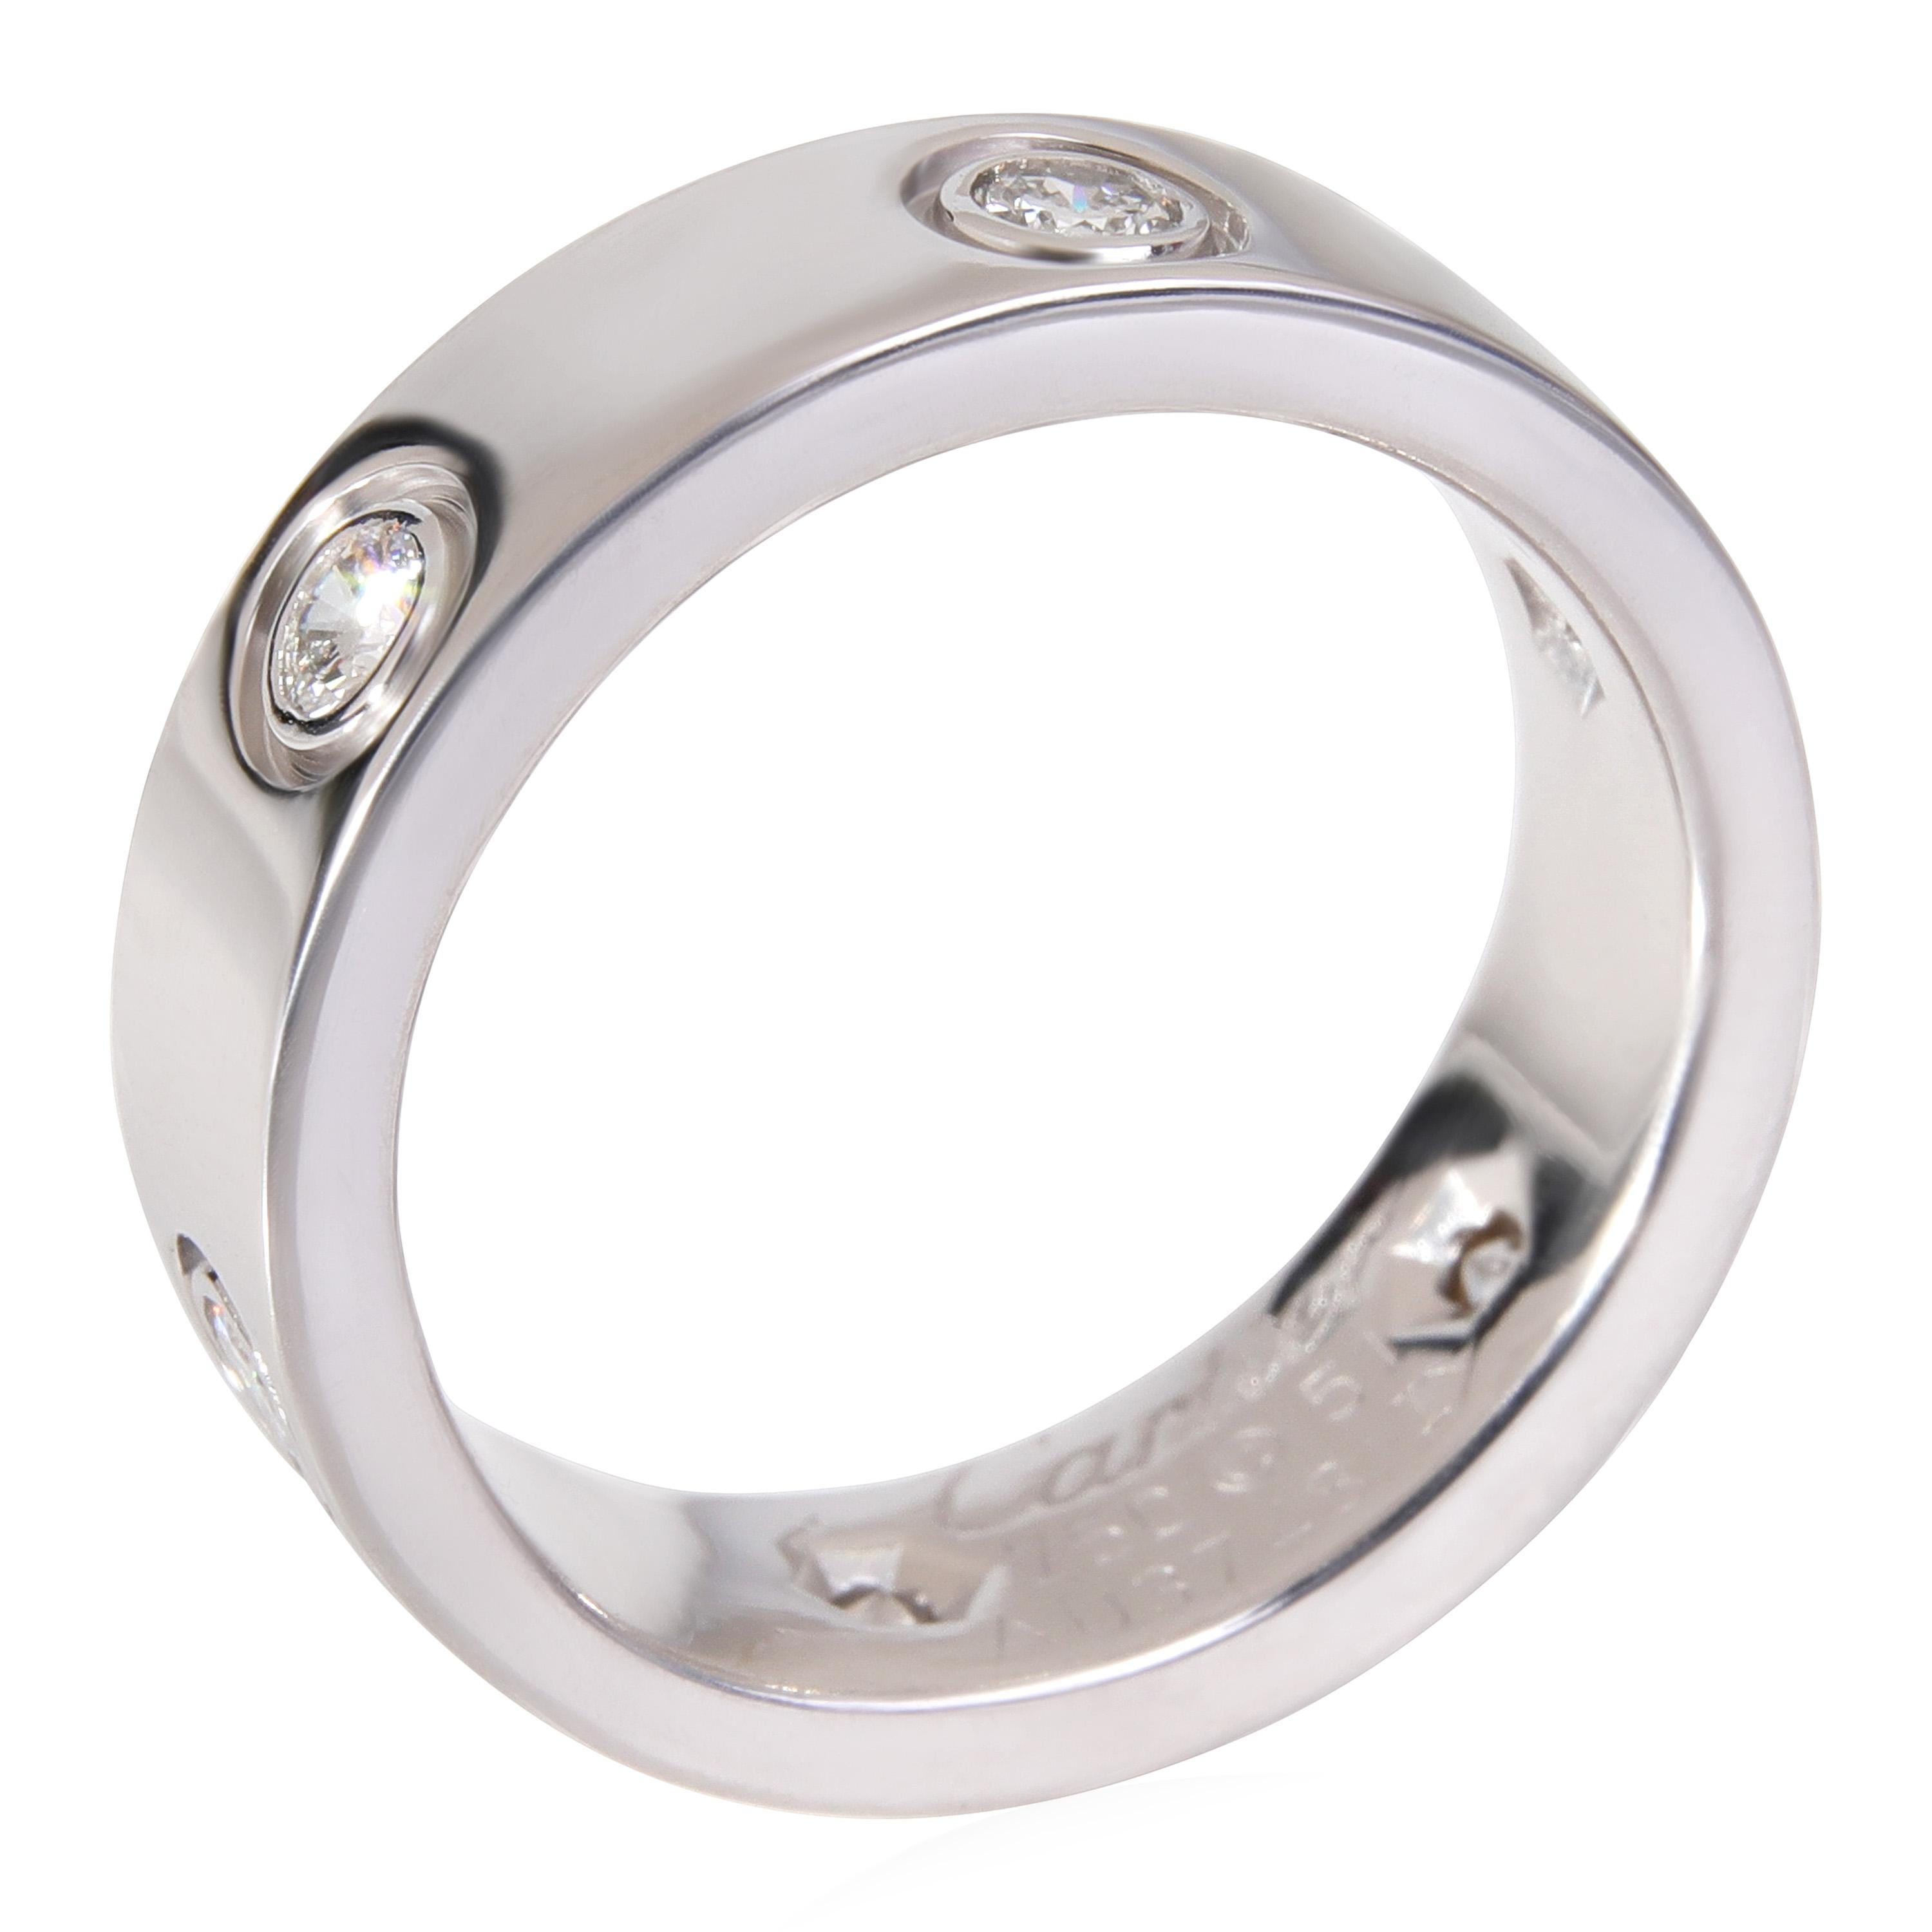 Cartier Love Diamond Ring in 18k White Gold 0.46 CTW

PRIMARY DETAILS
SKU: 120235
Listing Title: Cartier Love Diamond Ring in 18k White Gold 0.46 CTW
Condition Description: Retails for 5600 USD. In excellent condition and recently polished. Ring